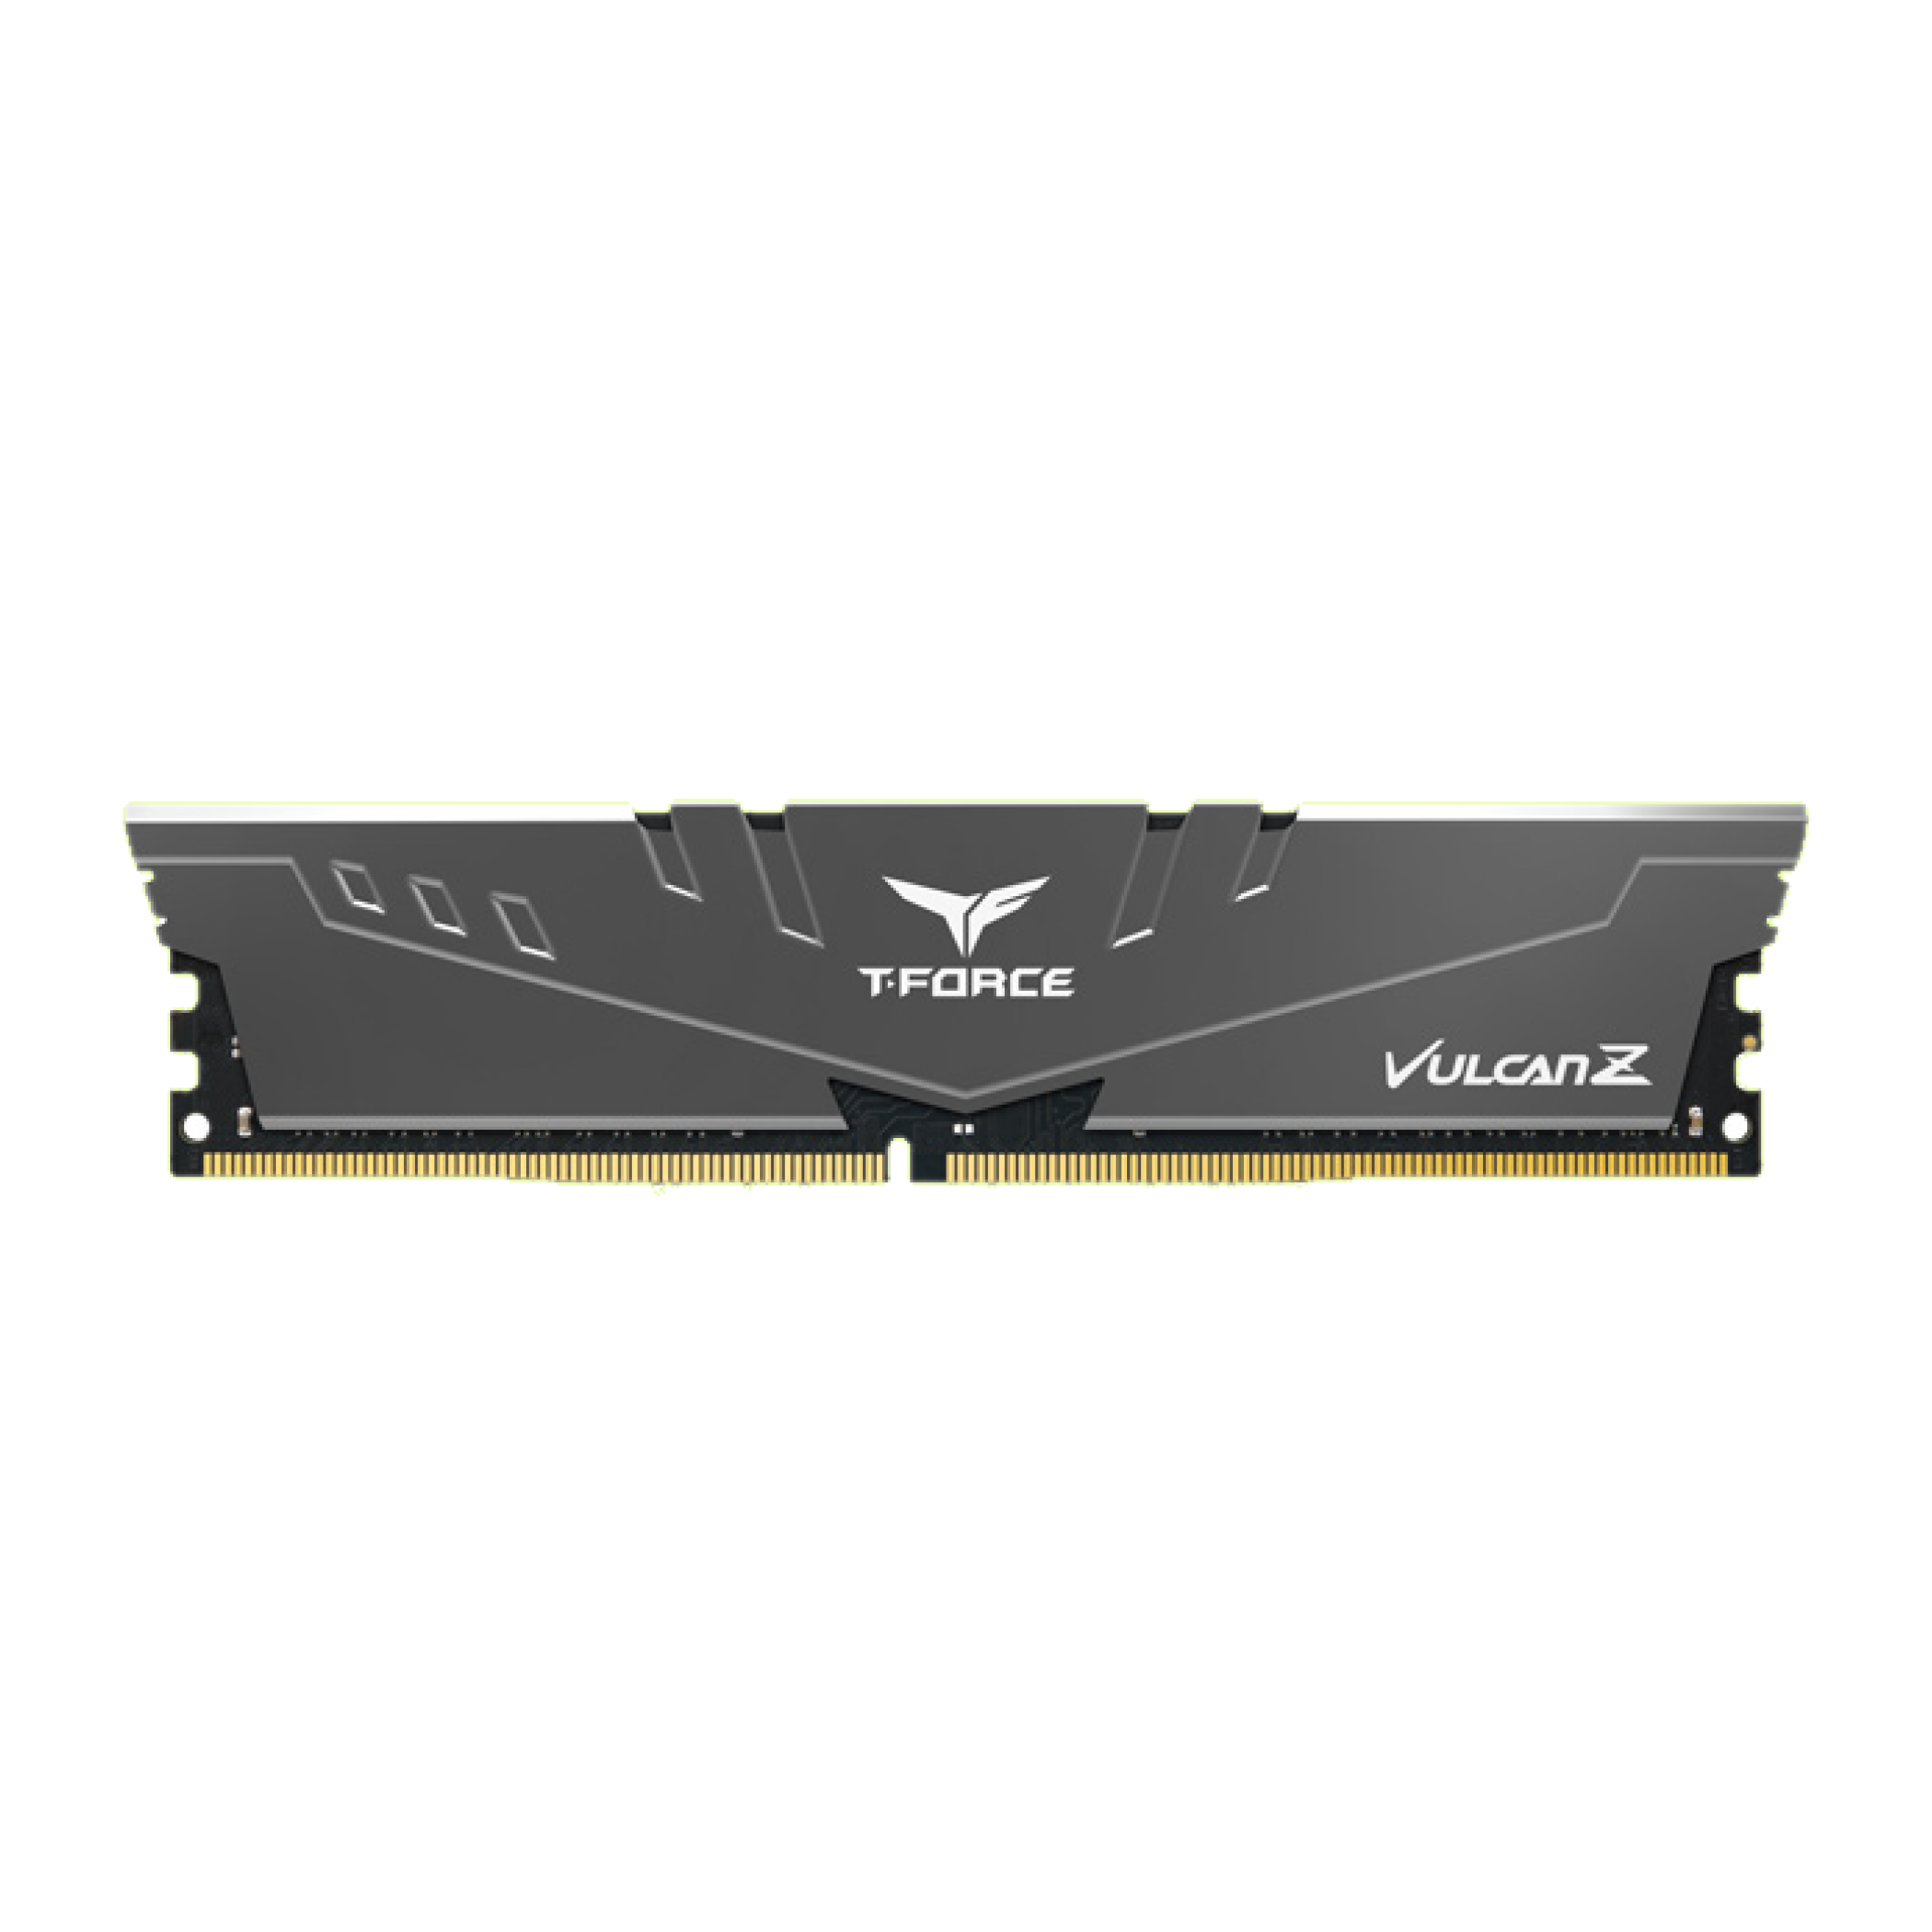 Teamgroup T-Force Vulcan Z DDR4 memory.